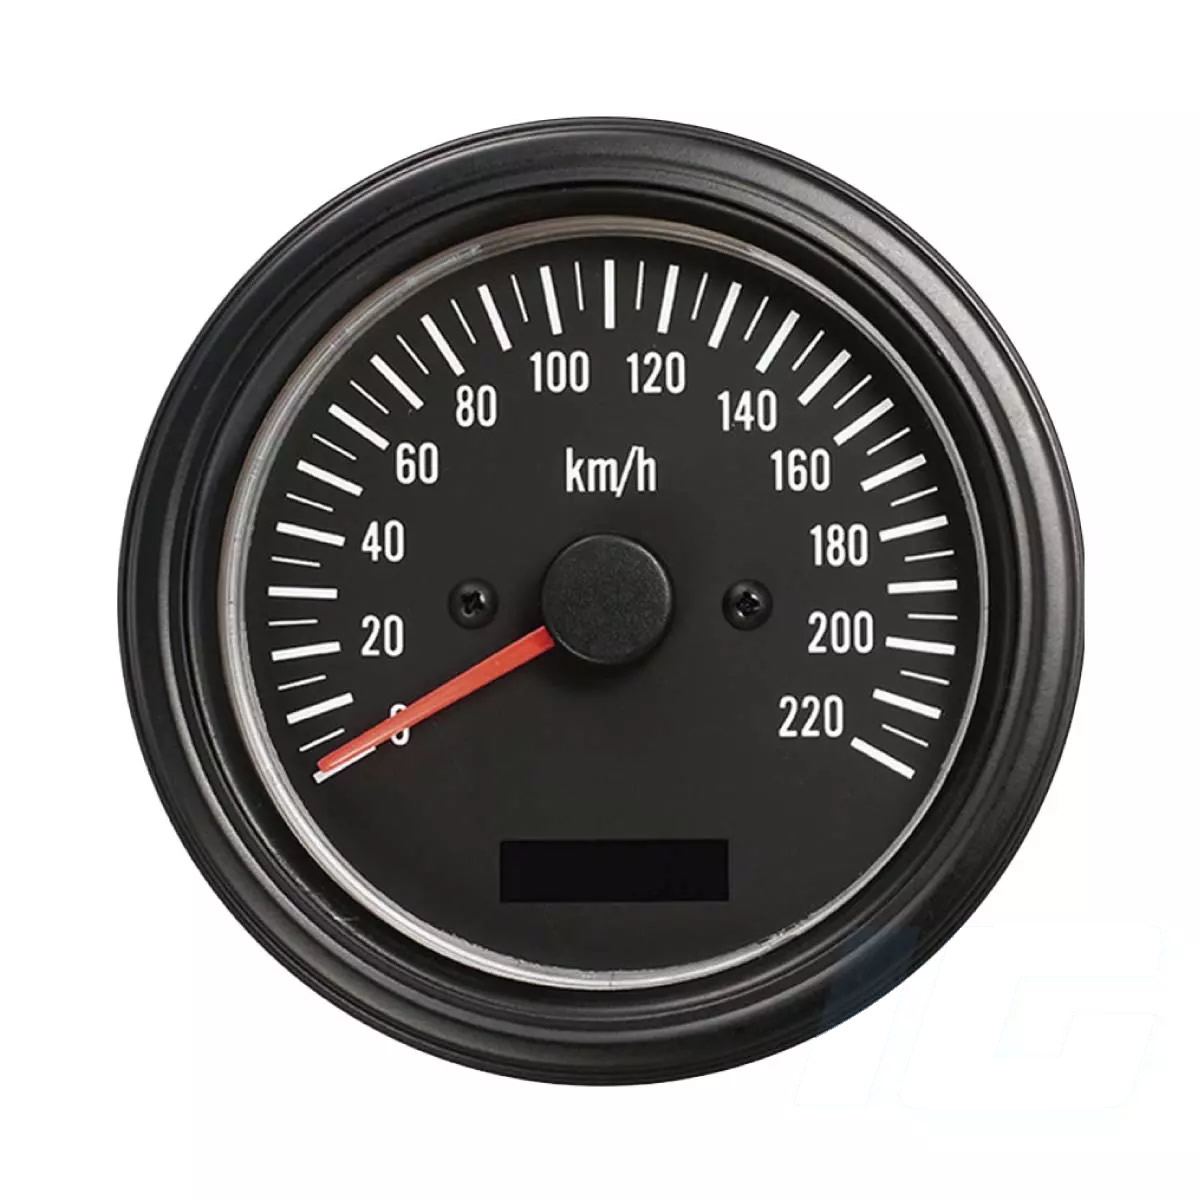 Speedometer for a car